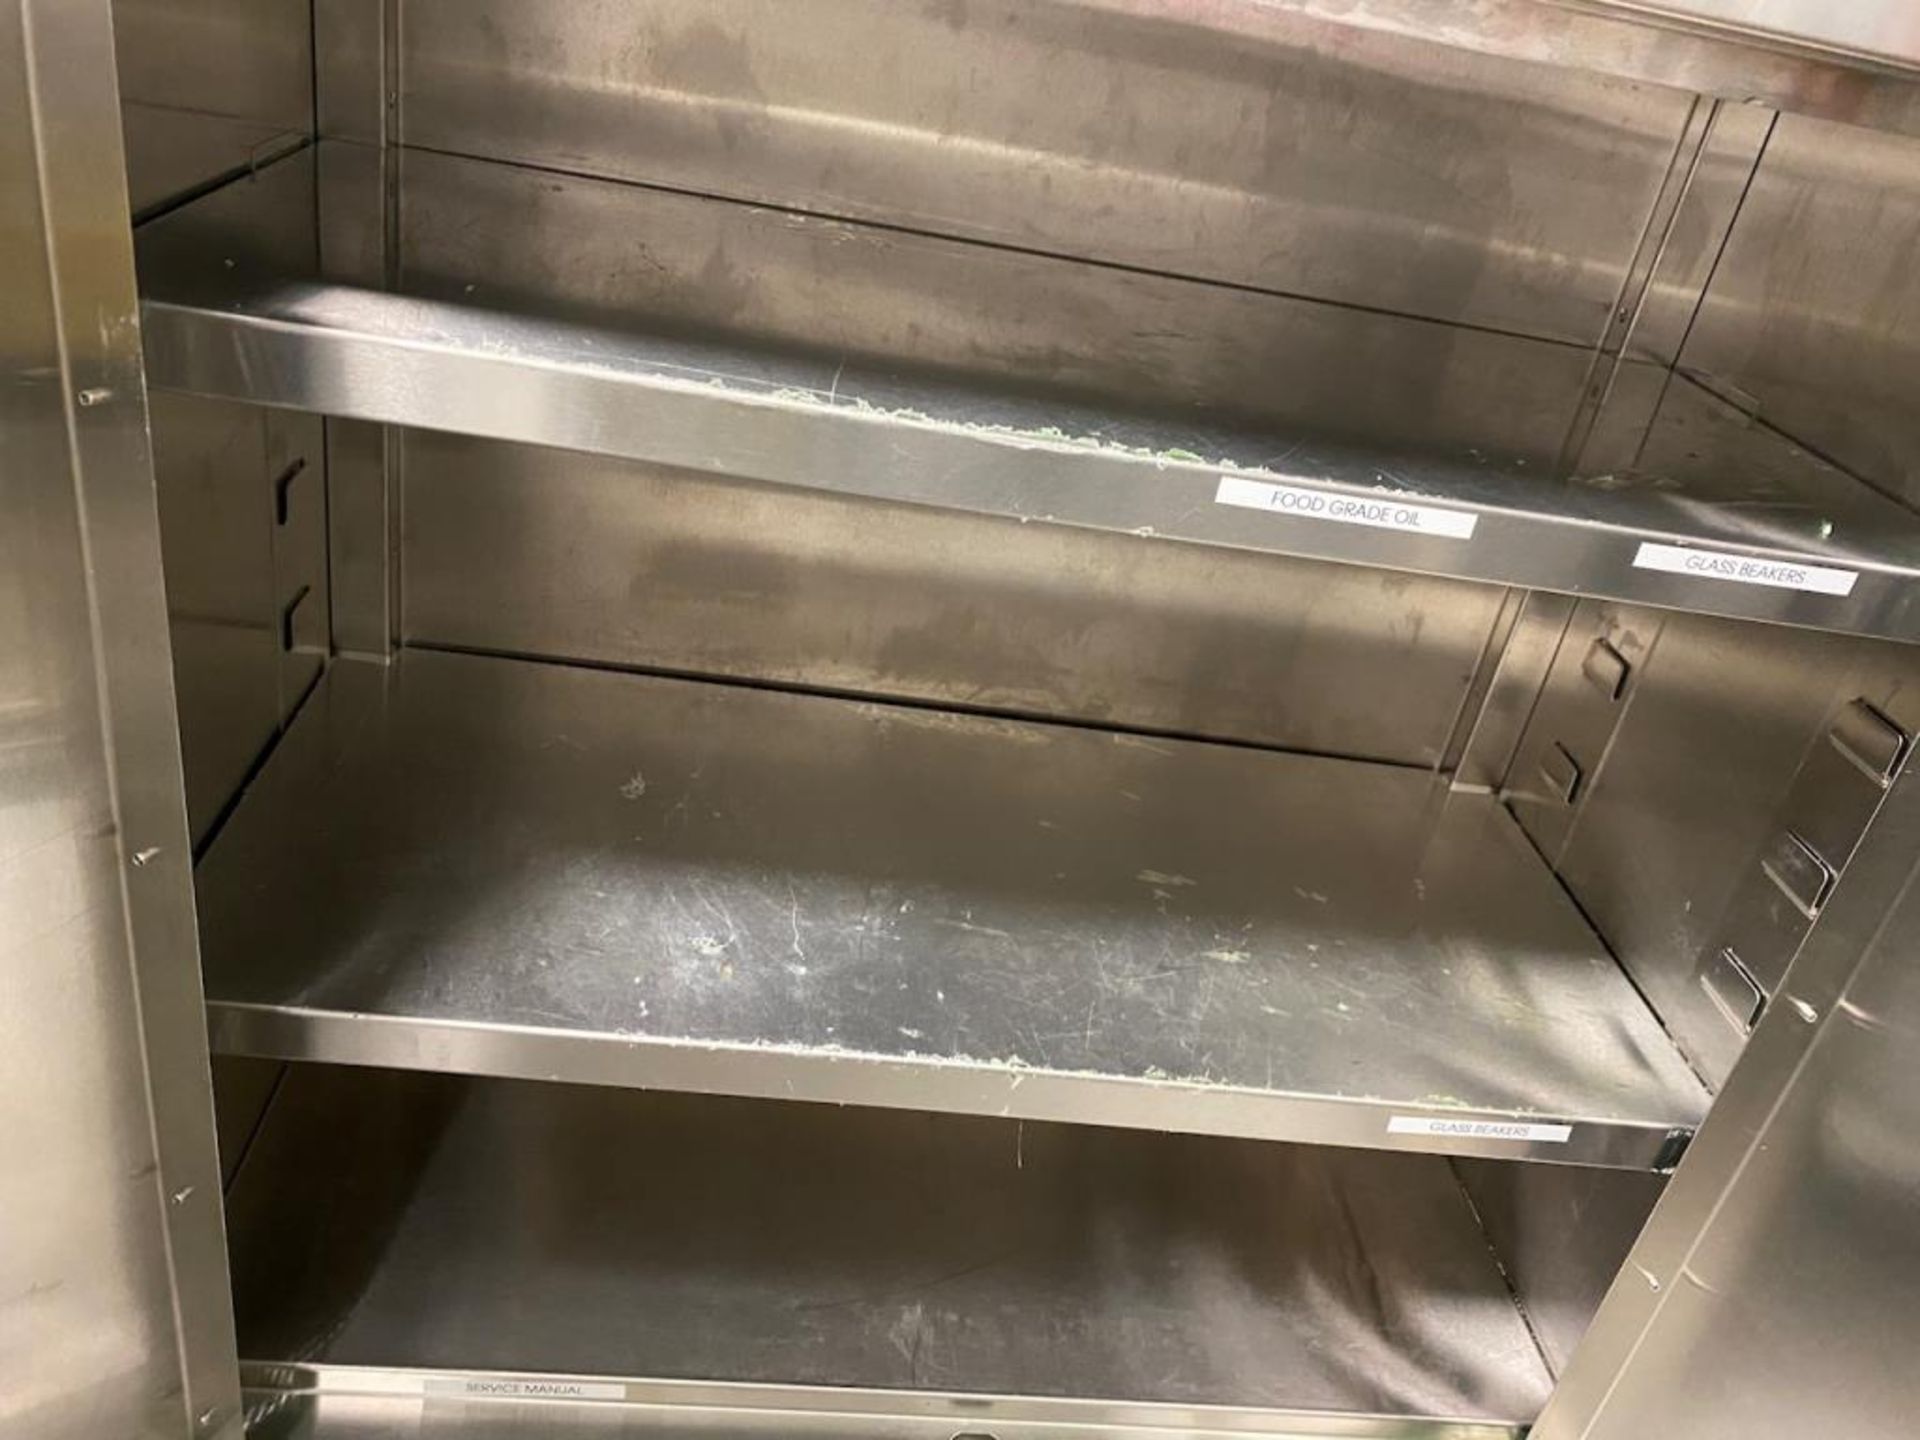 Stainless Steel Cabinet - Image 2 of 2